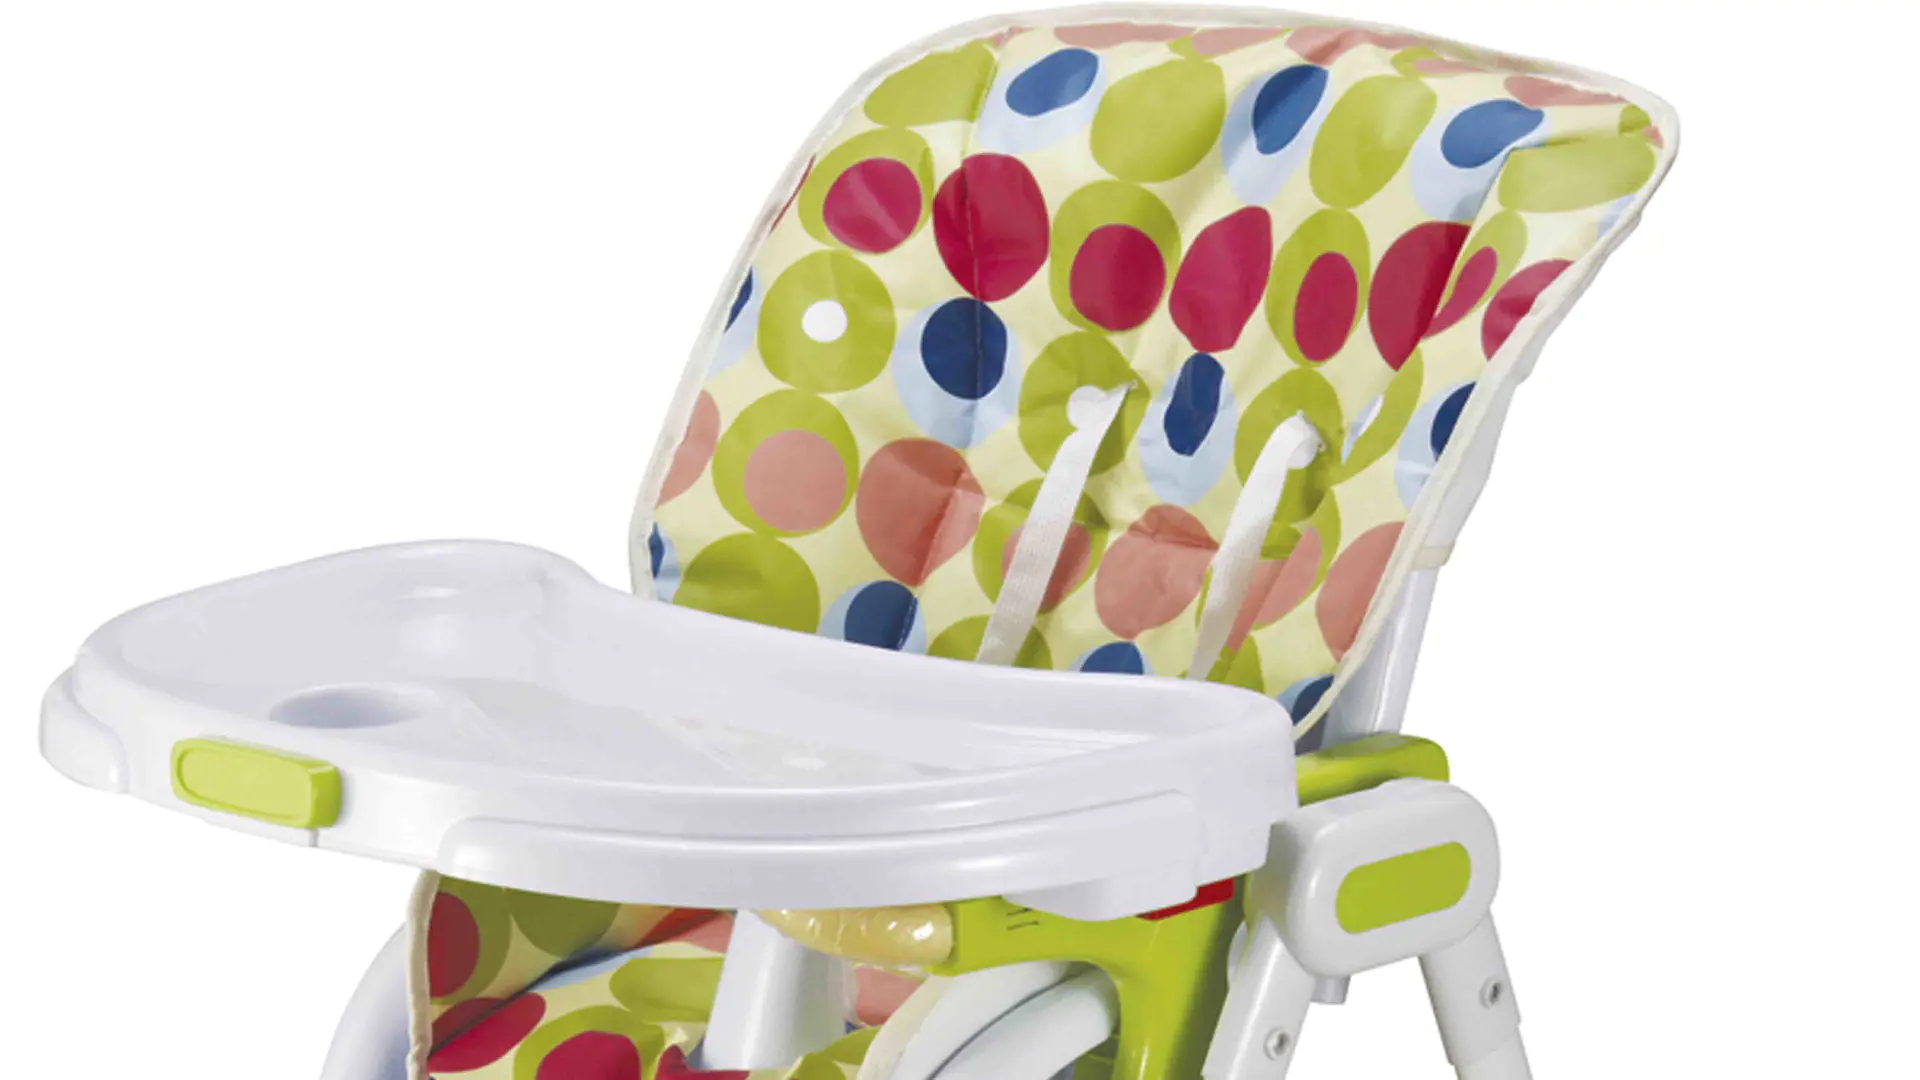 Aoqi plastic cheap baby high chair series for infant